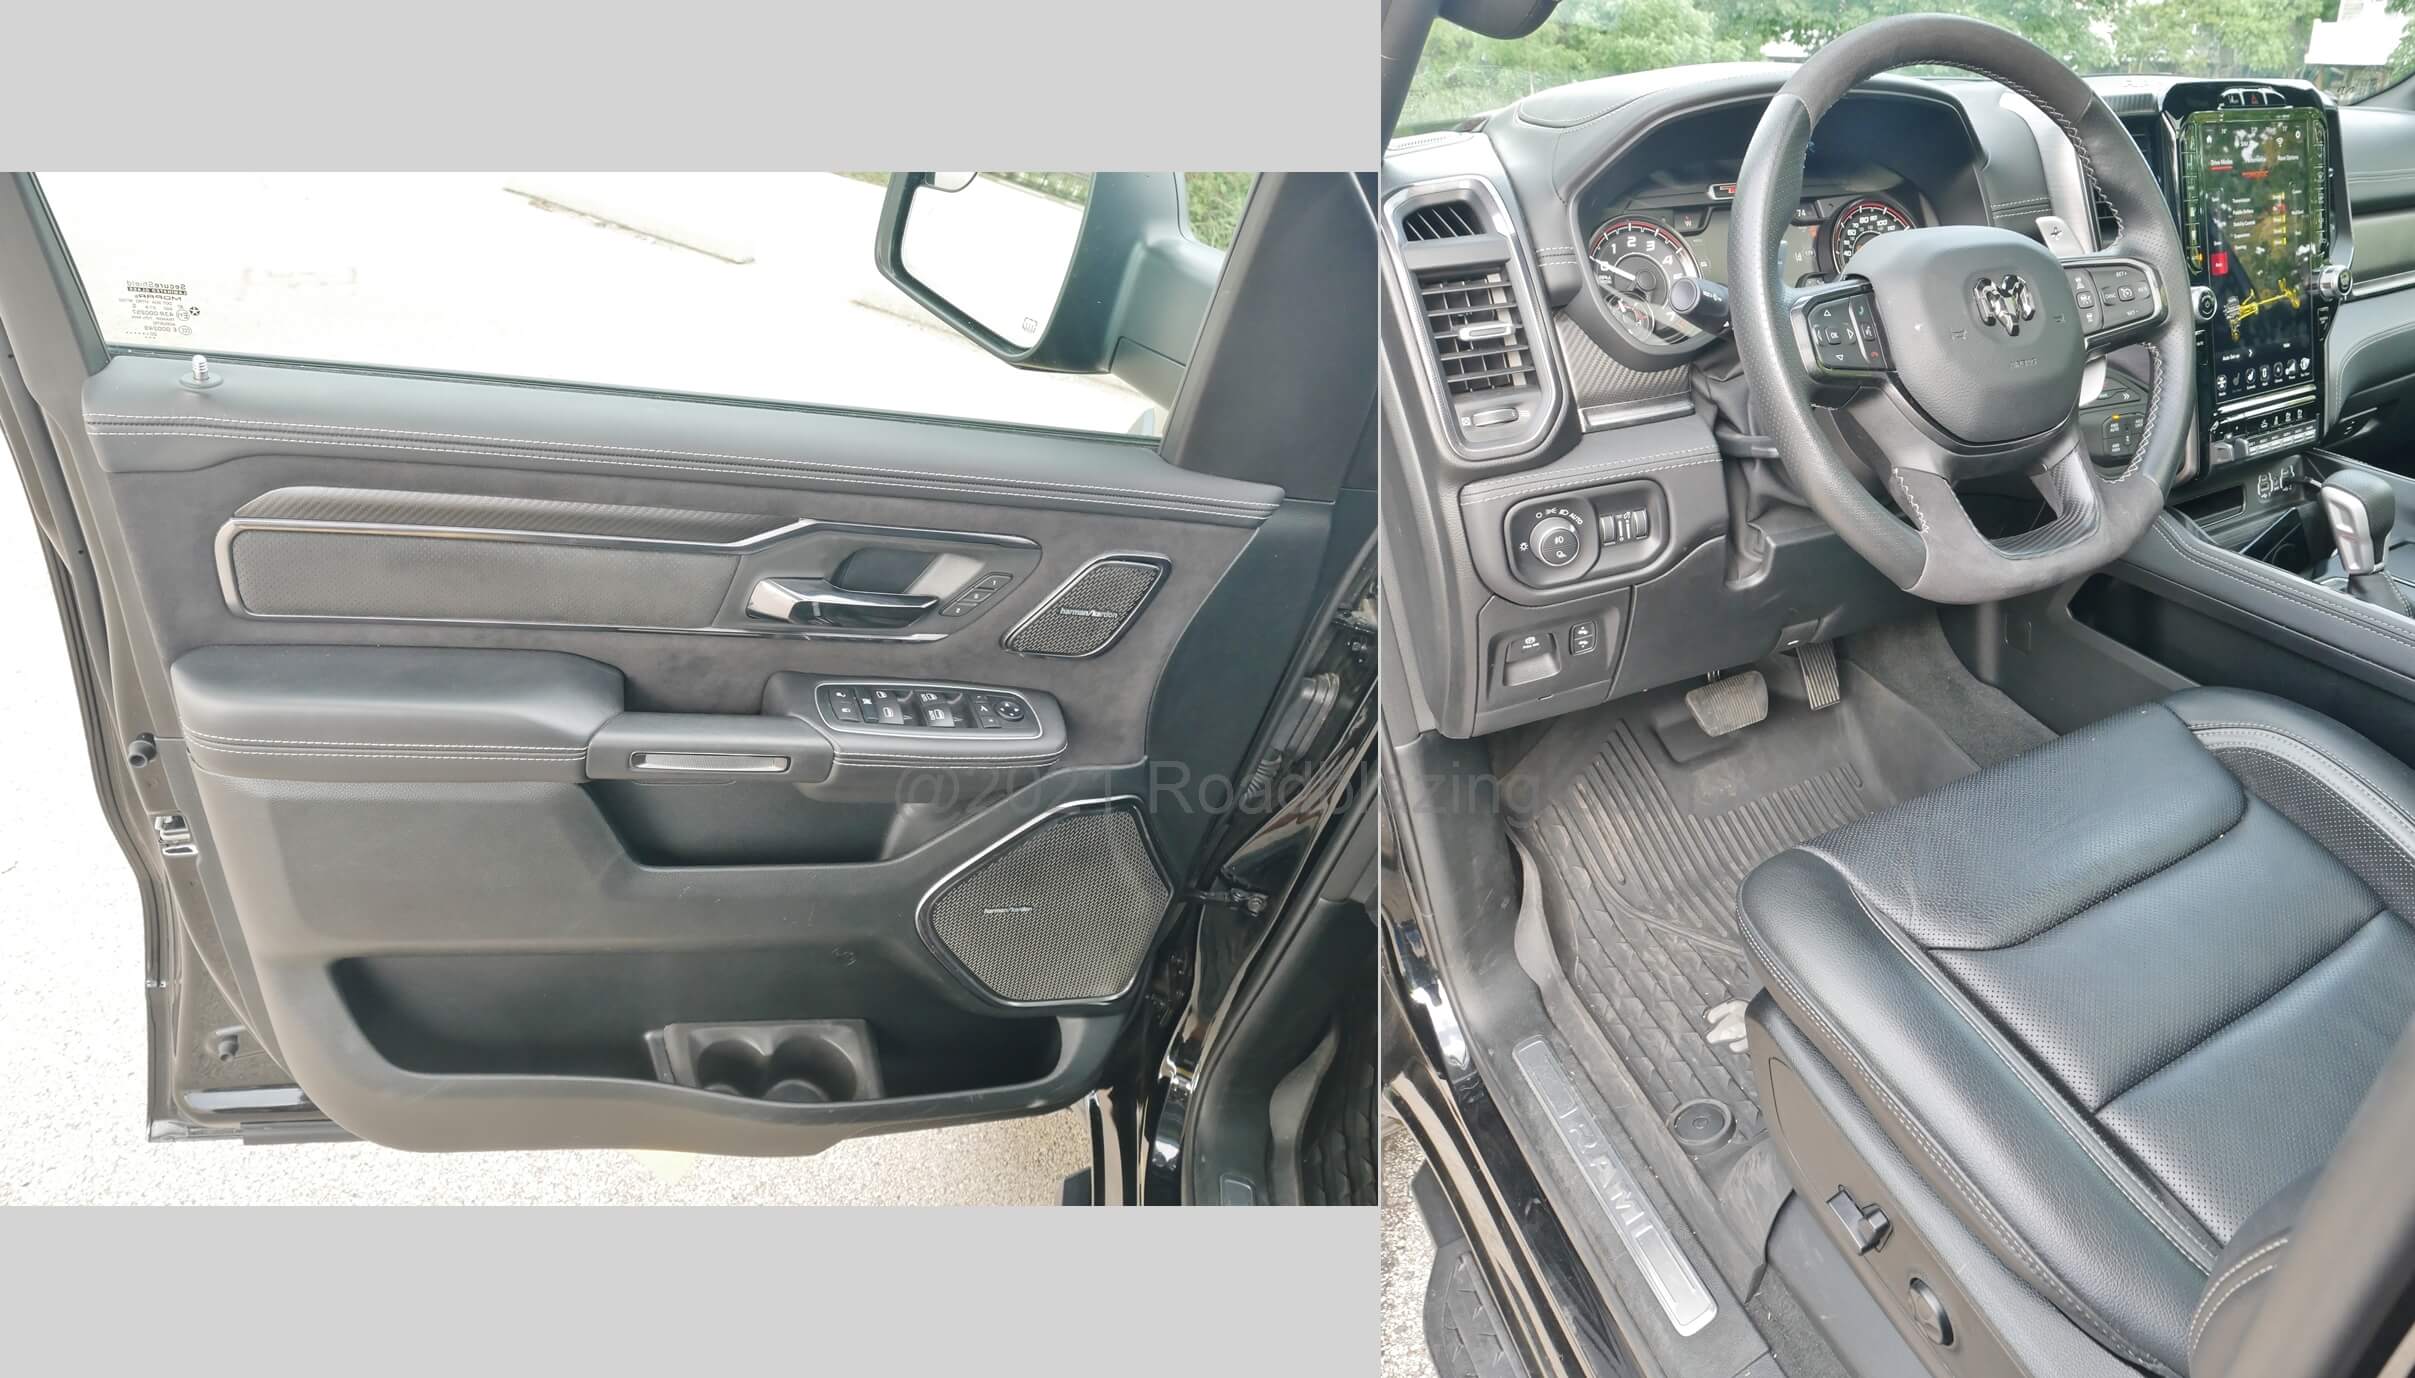 2021 RAM 1500 TRX Crew Cab 4x4: driver's entry with lower left dash controls for power pedal adjustment